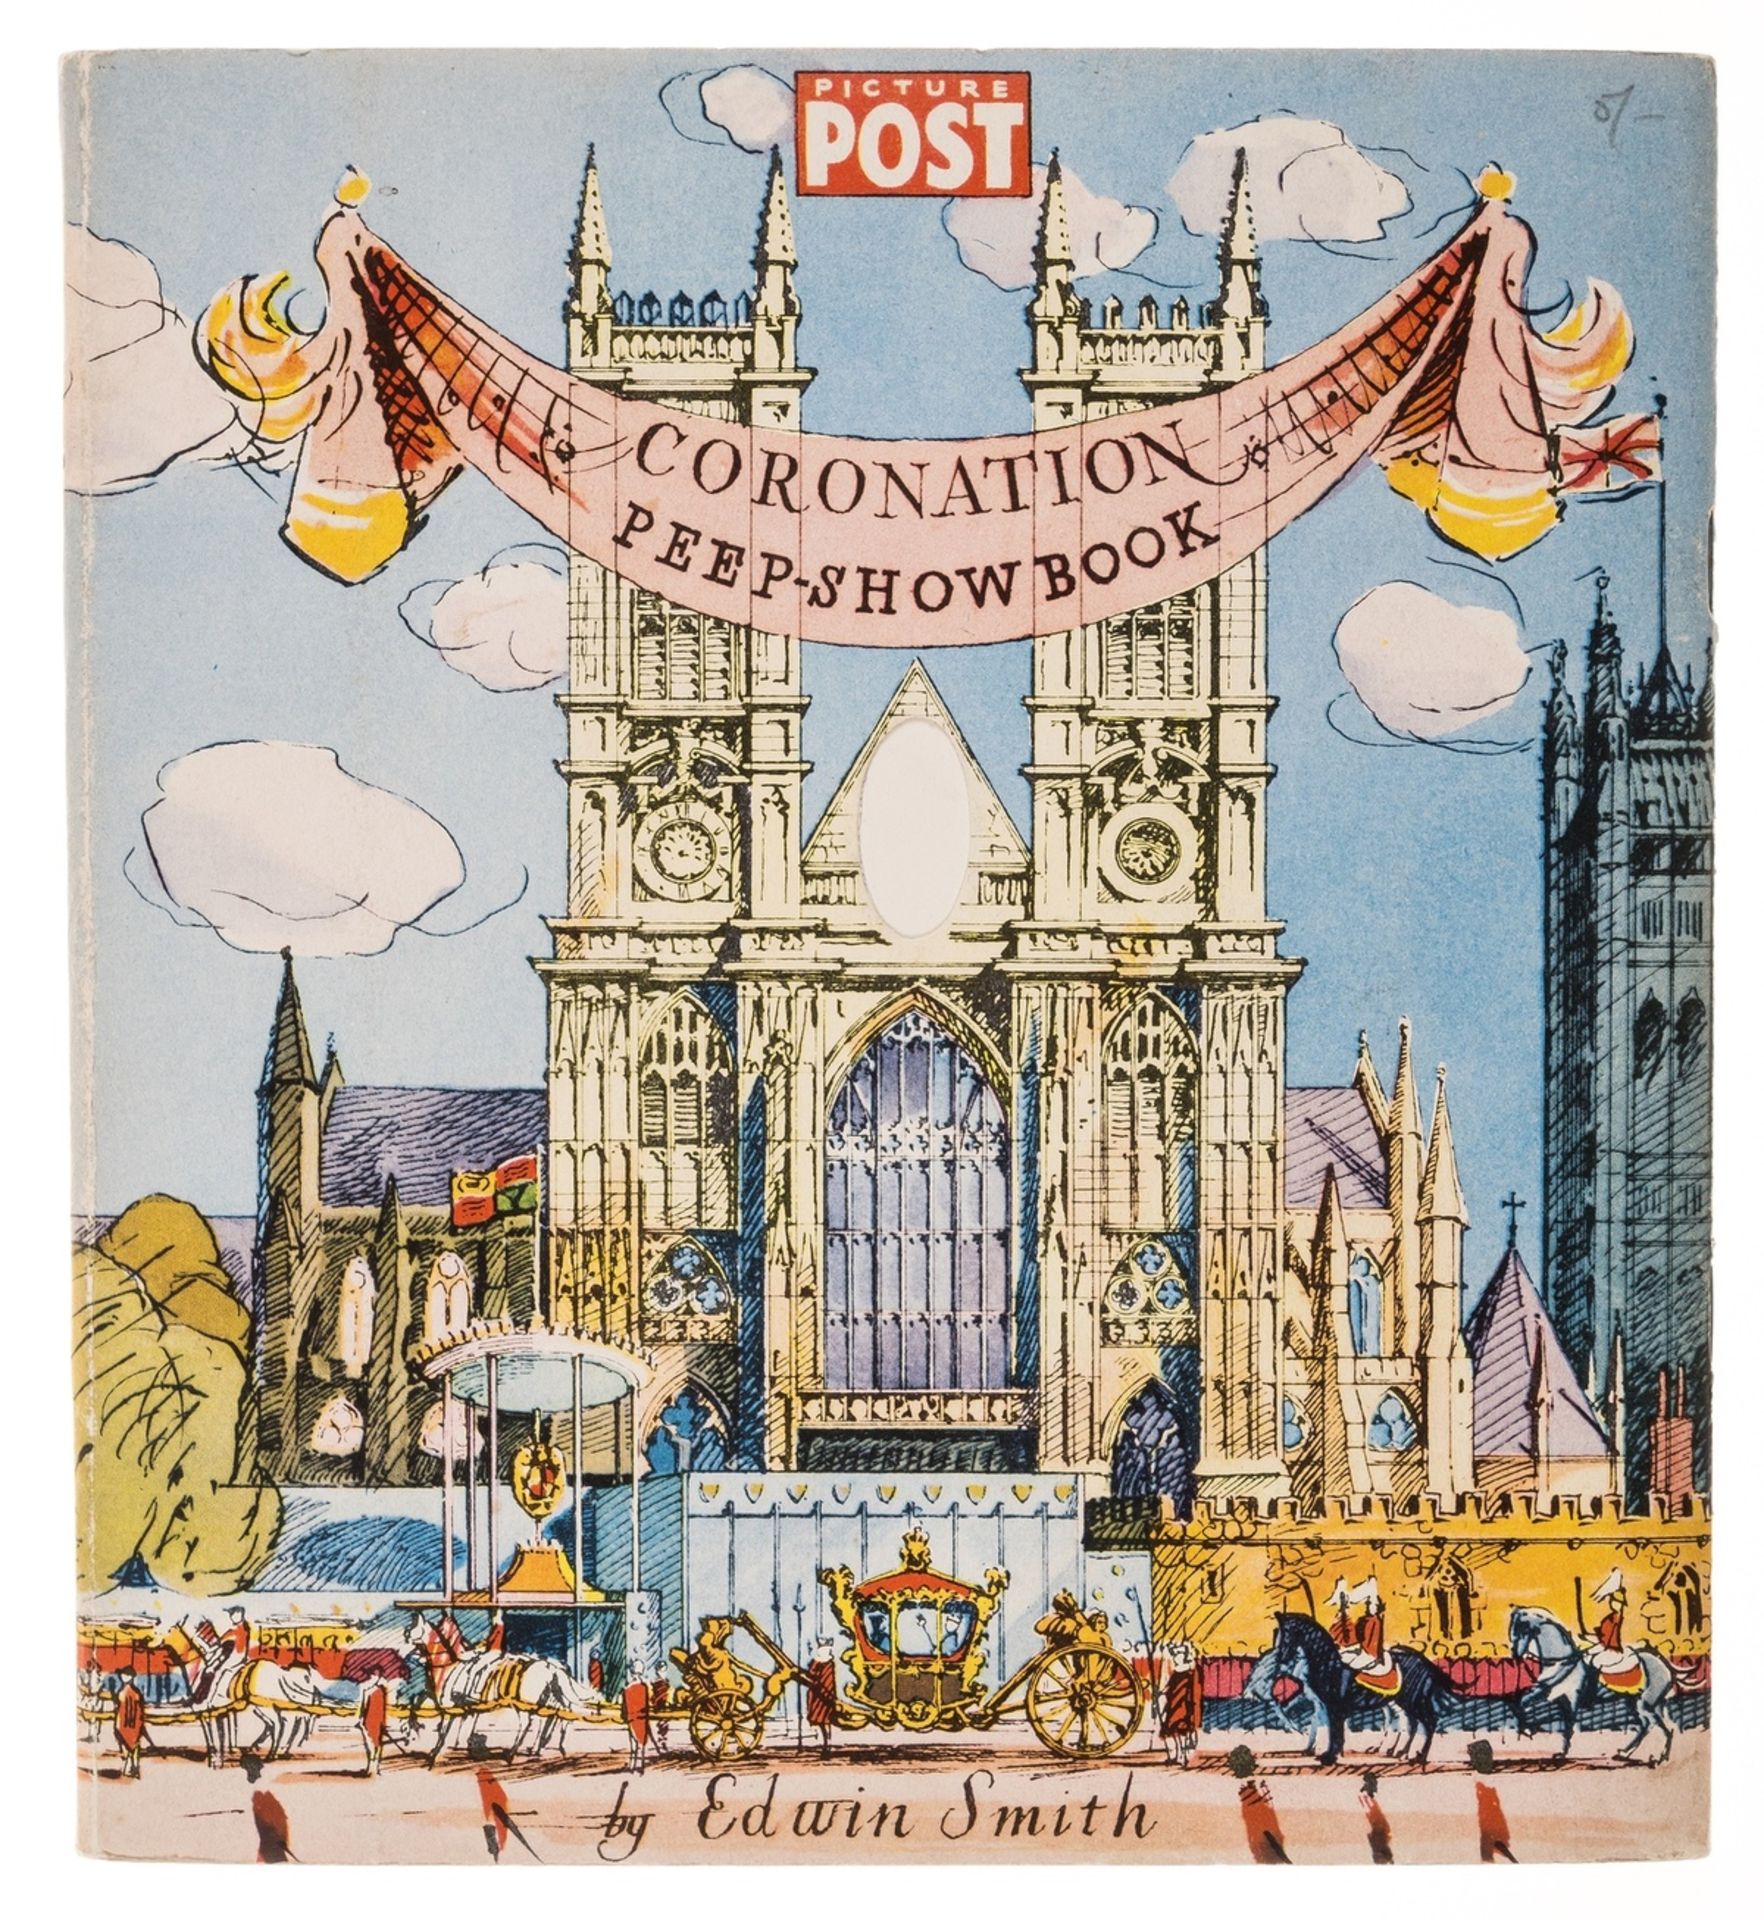 Cook (Olive) & Edwin Smith., The Picture Post Coronation Peep-Show Book, first edition, …